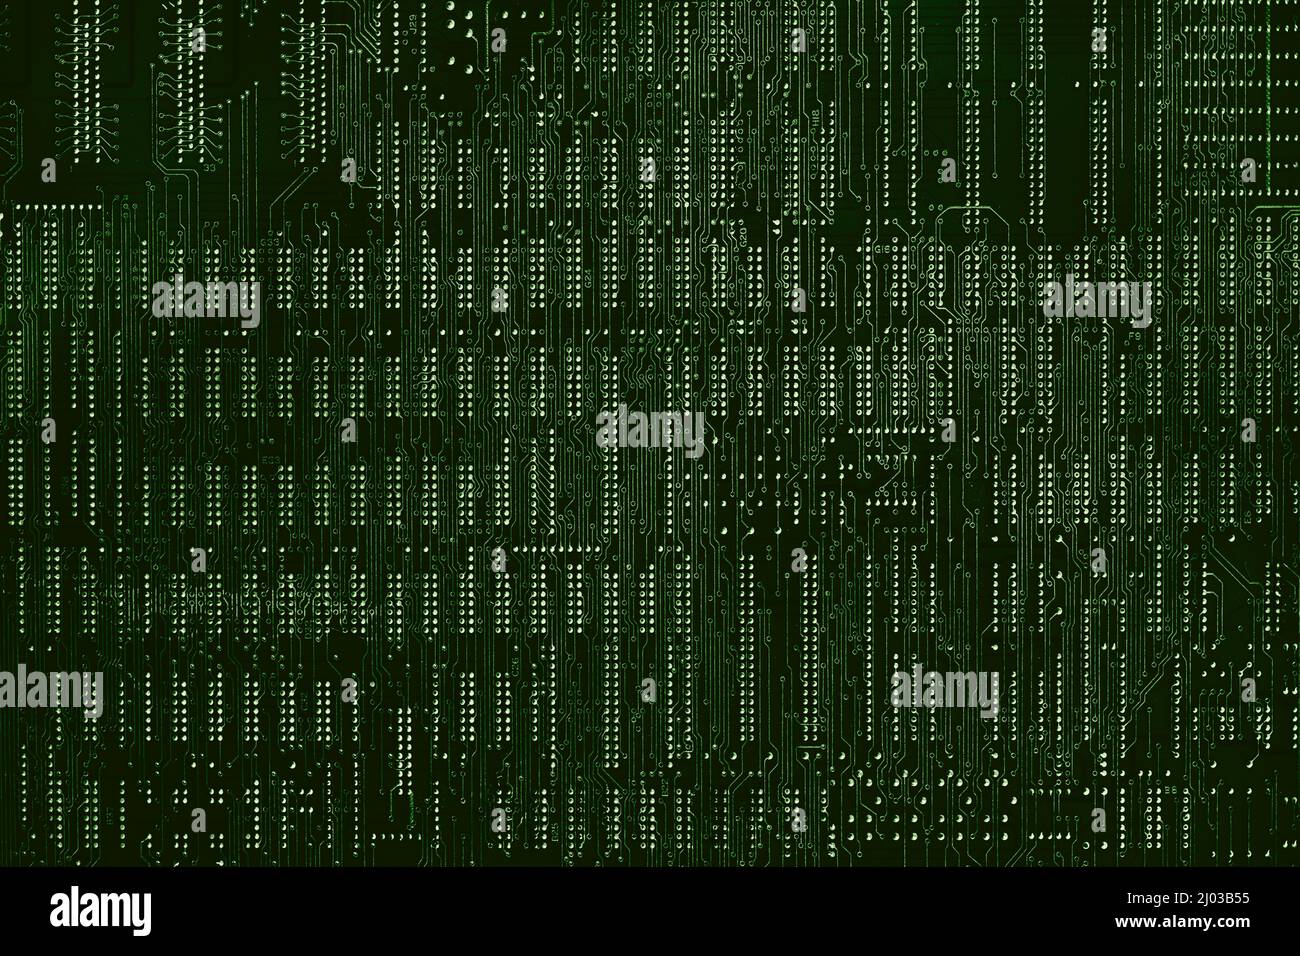 Printed Circuit Board (PCB) back side with lead solder texture pattern for Digital Technology Background. Stock Photo